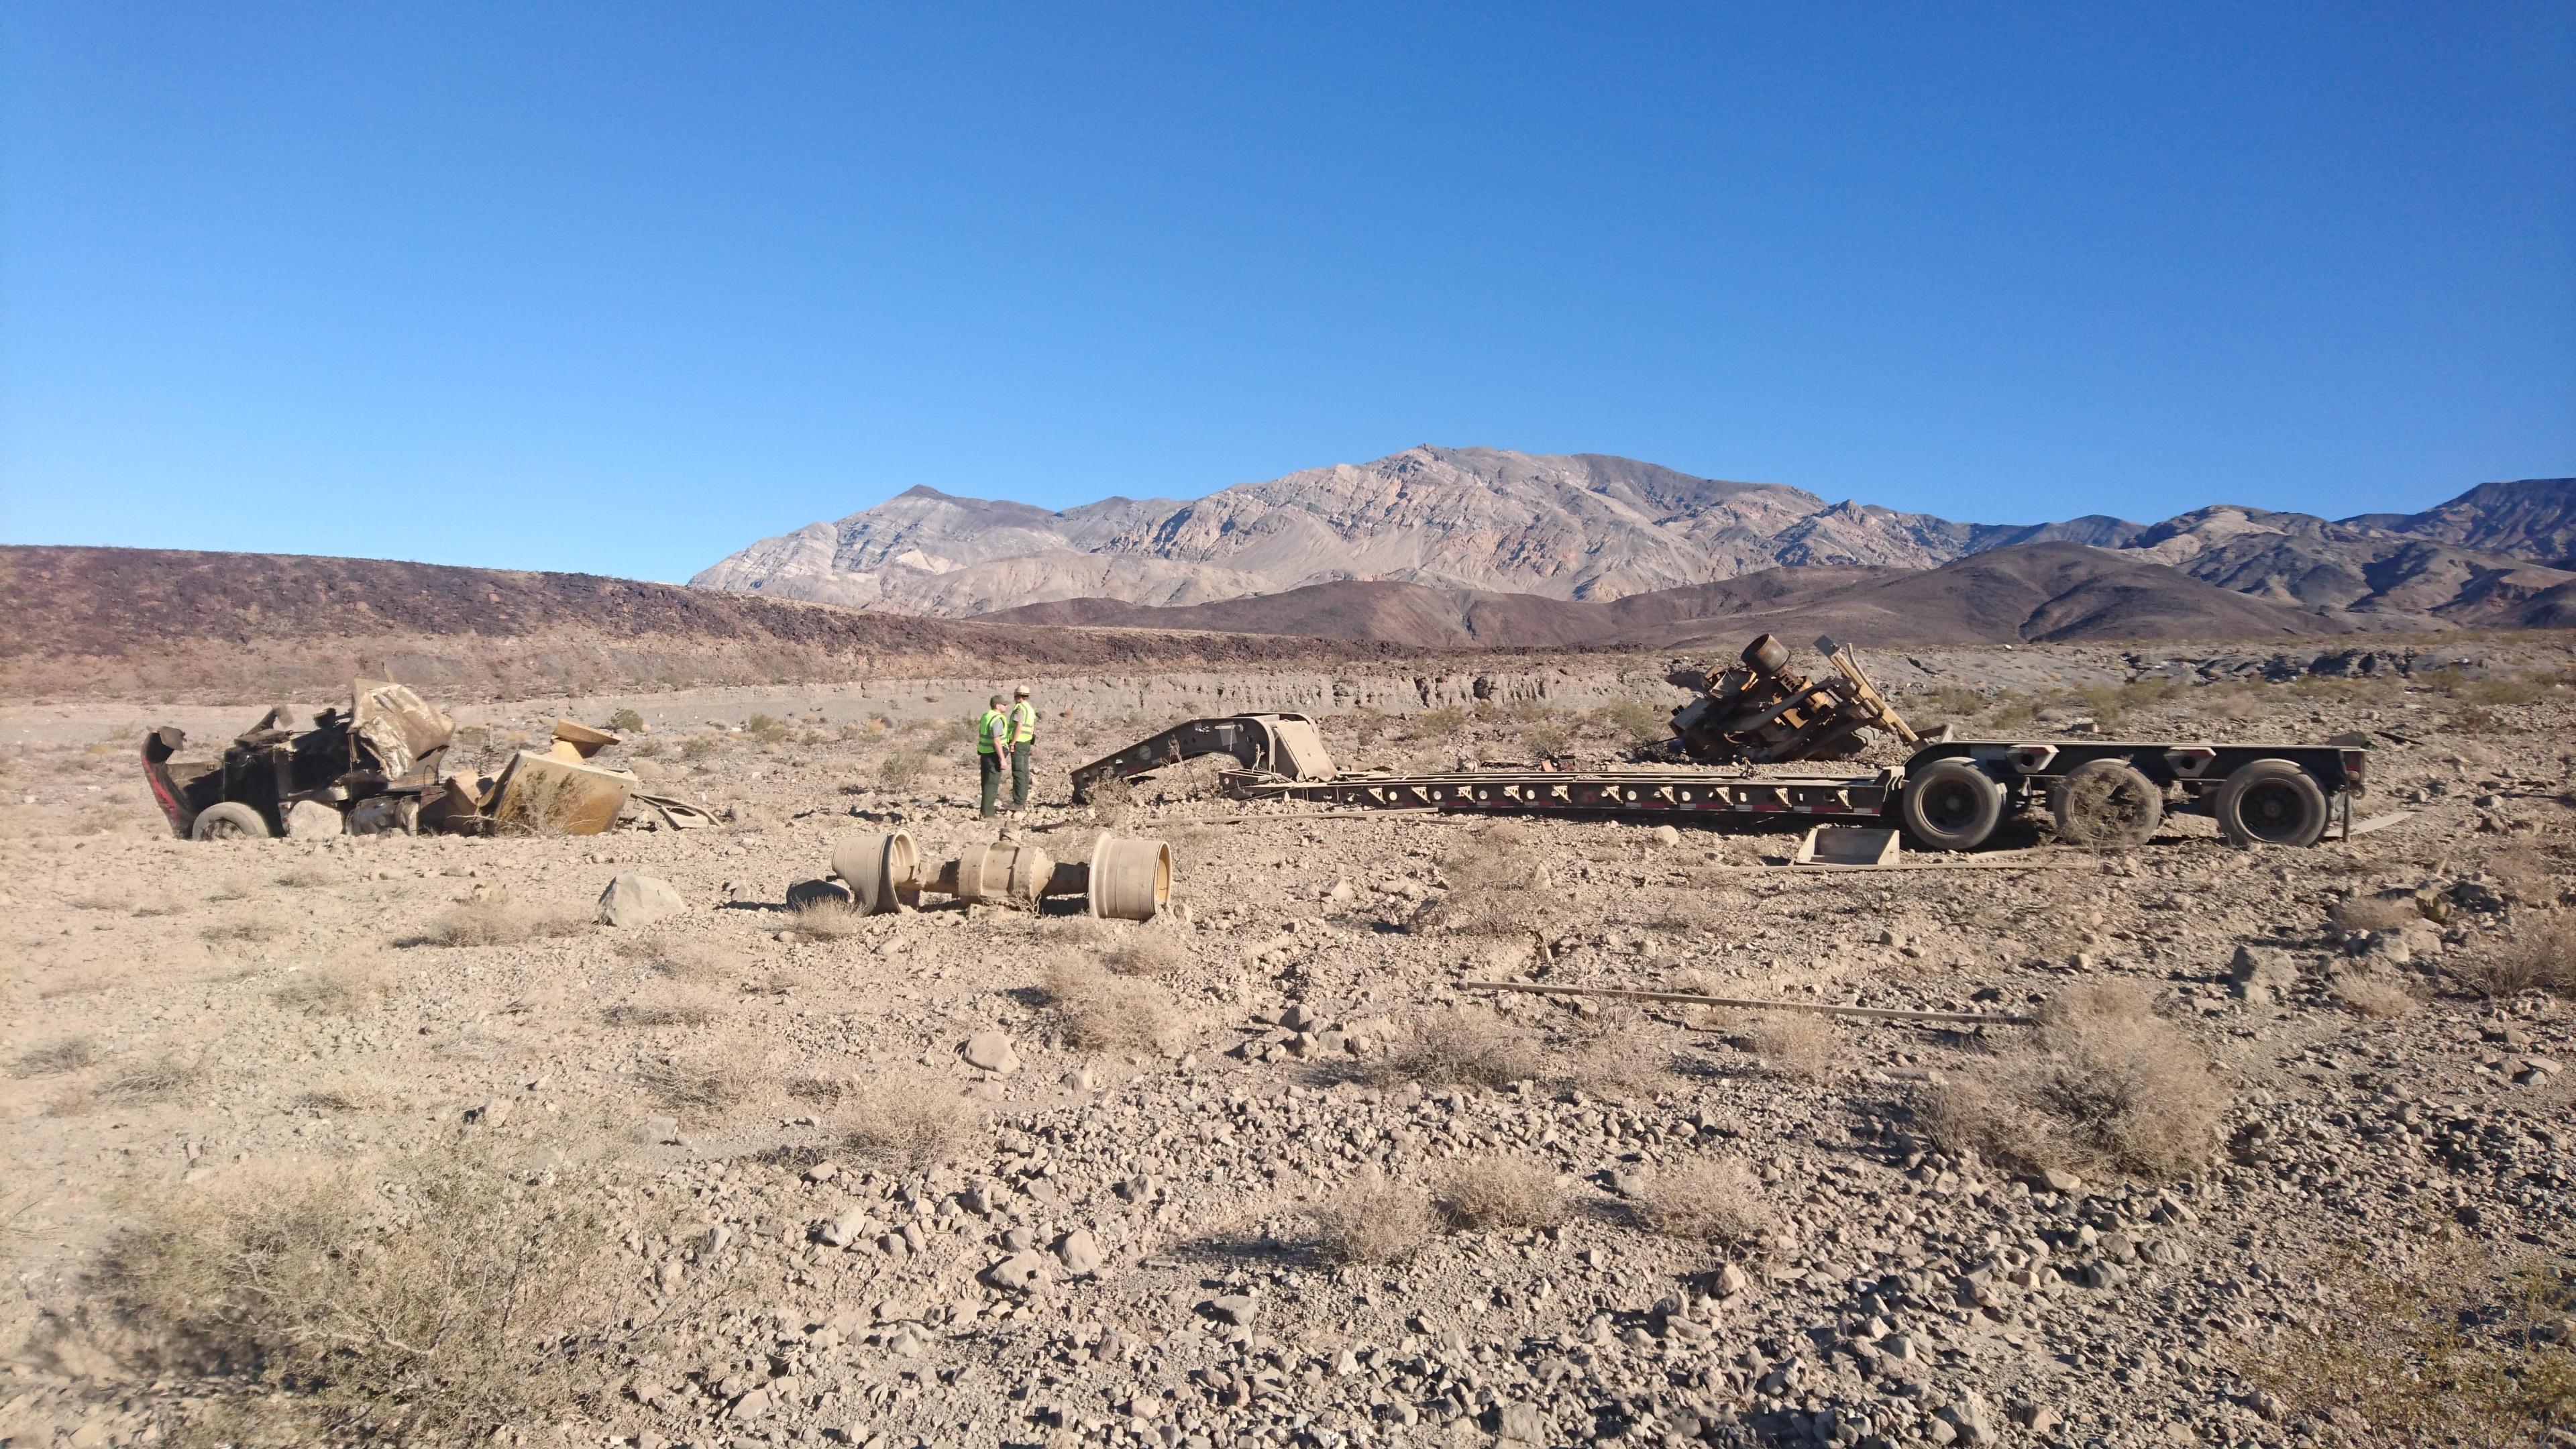 Two employees standing in yellow vests in the distance, with a large tractor trailer overturned next to them. Large brown-hued desert mountains rise in the background.